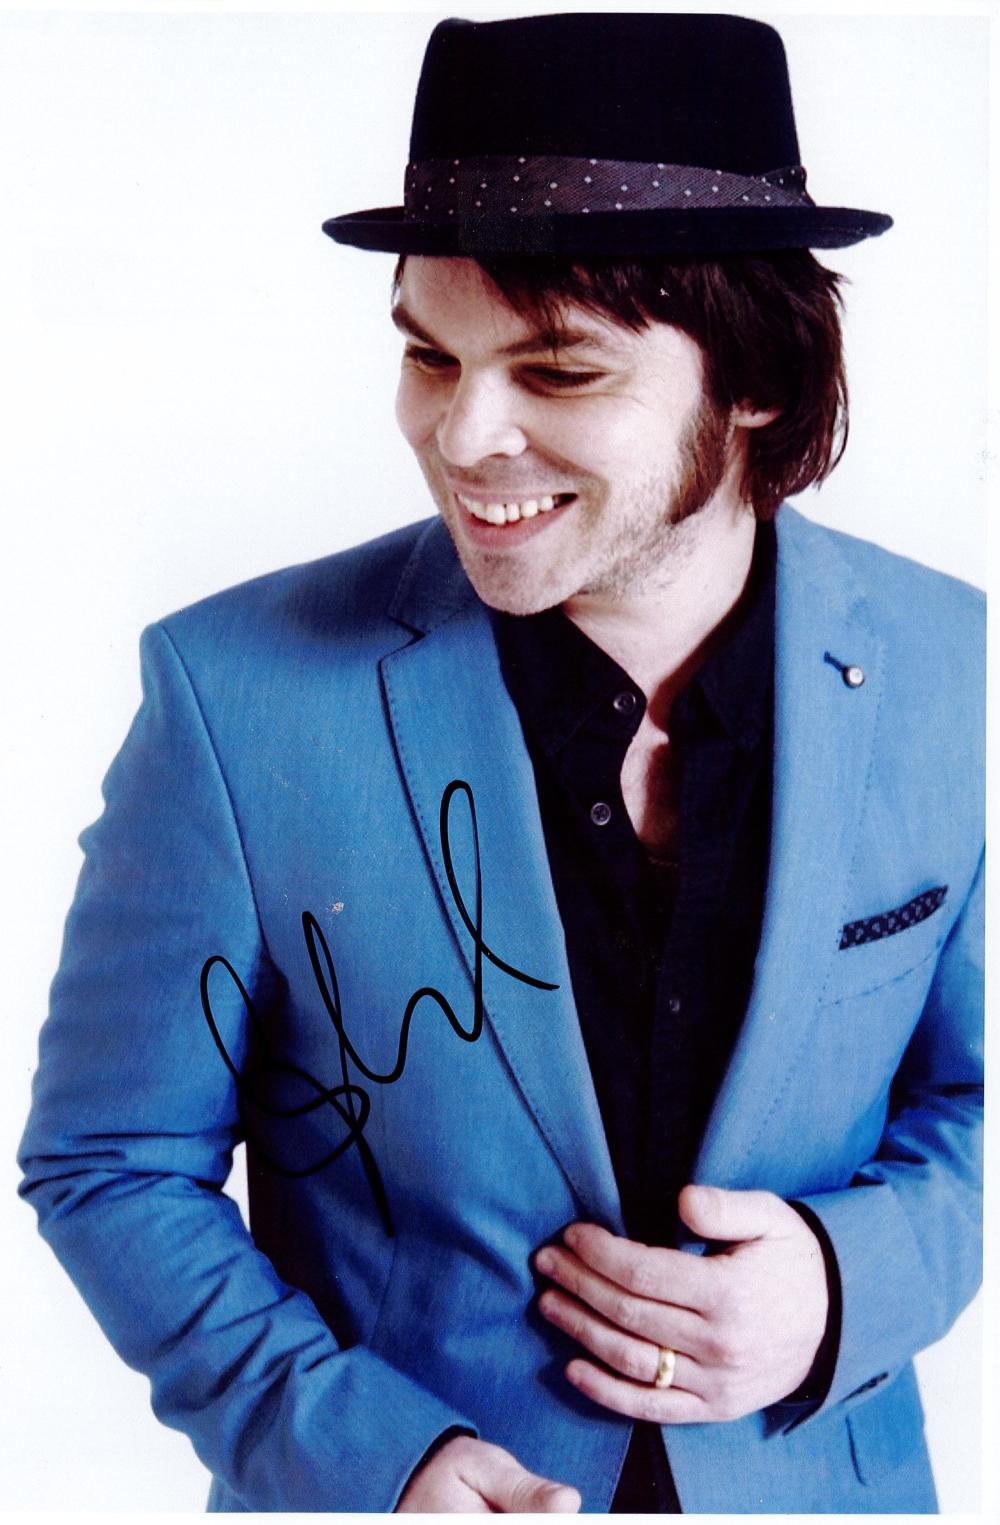 English Musician Gaz Coombes Personally Signed 12x8 Colour Photo. Signed in black marker pen. Gaz